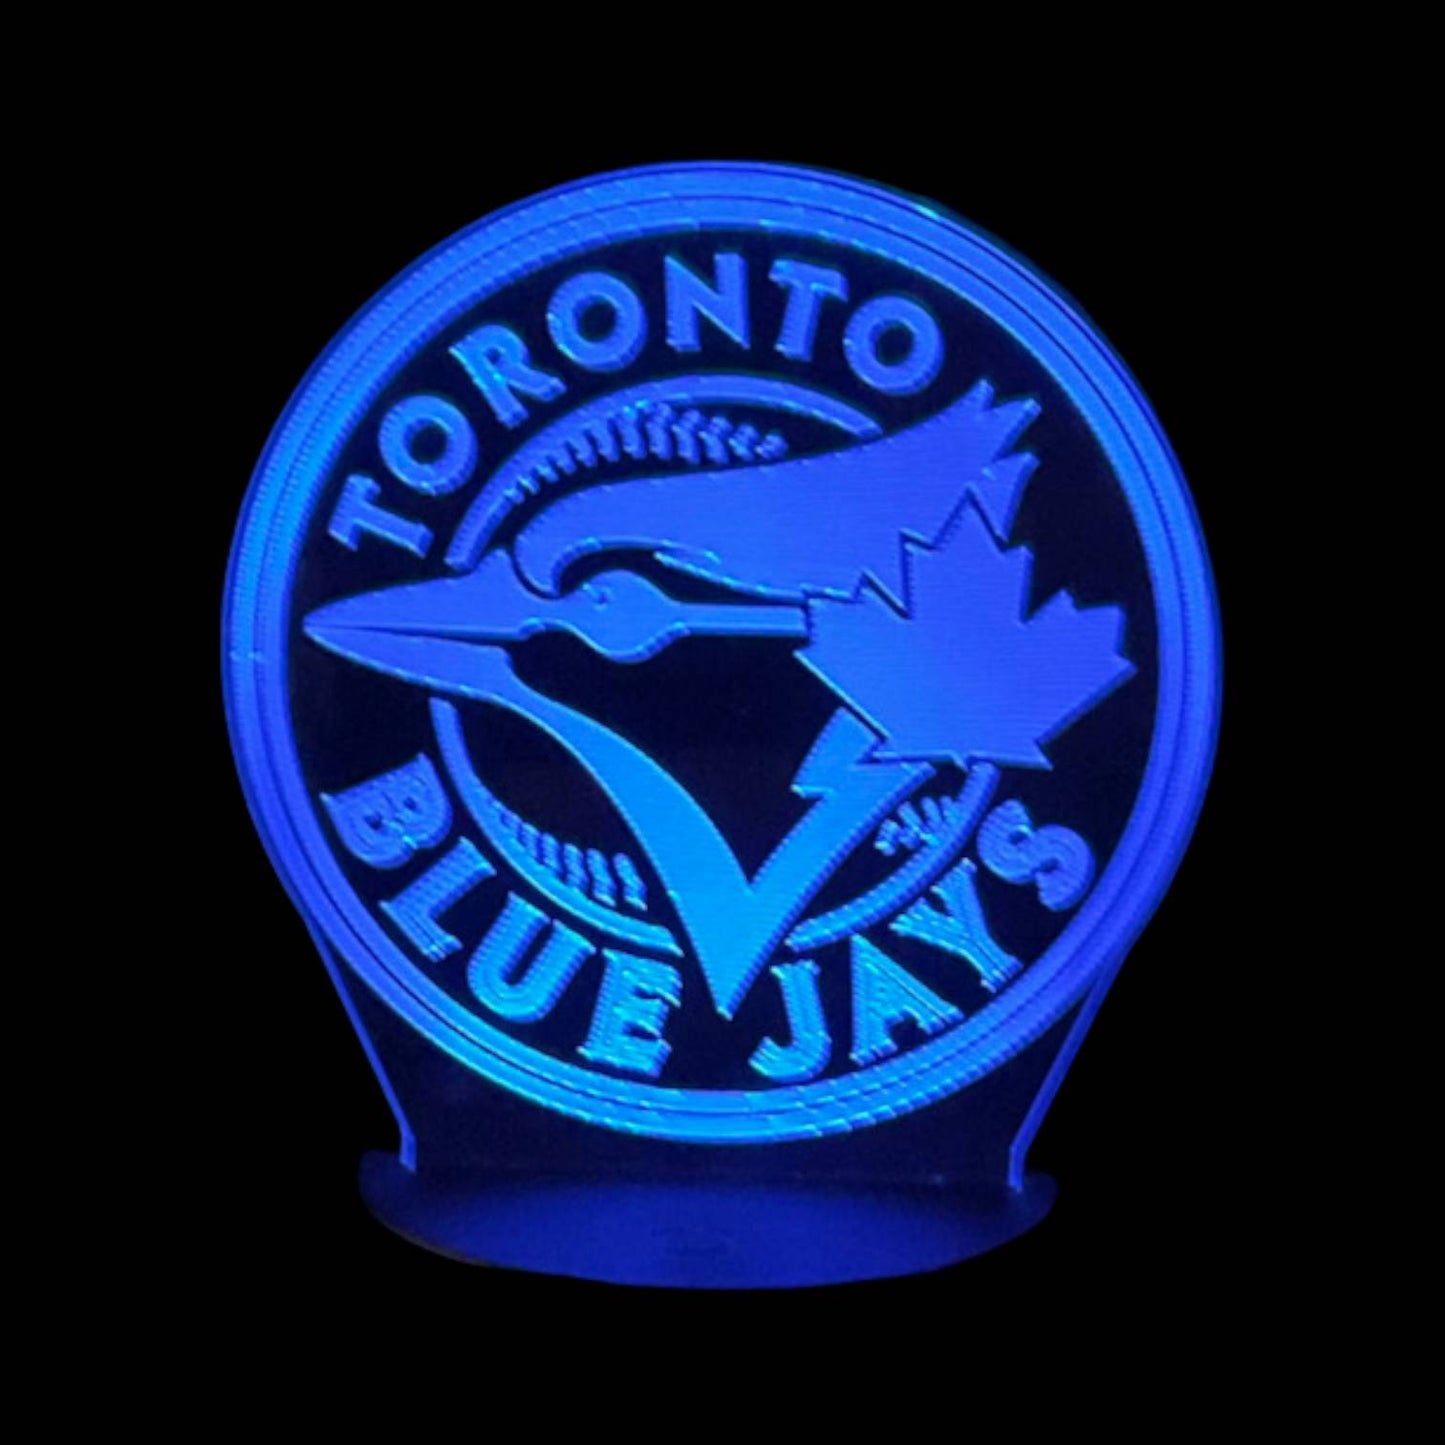 Toronto Blue Jays 3D LED Night-Light 7 Color Changing Lamp w/ Touch Switch